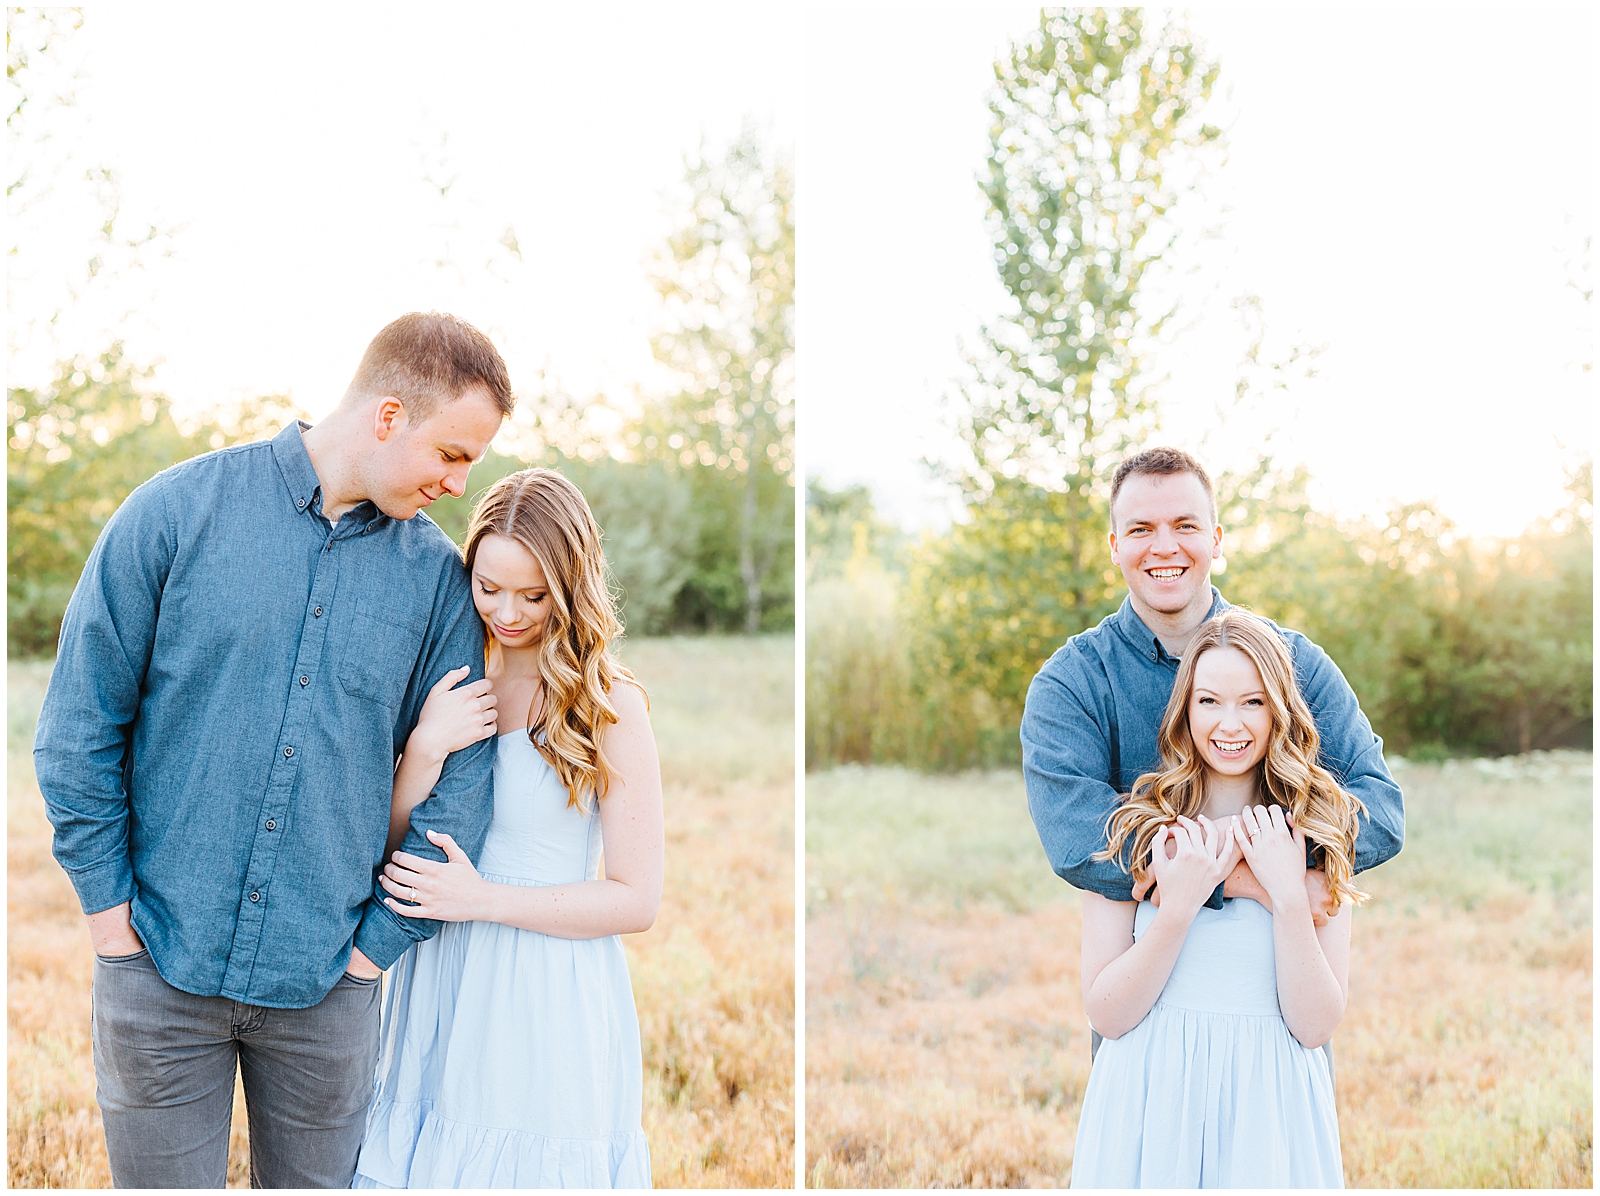 Navy and Light Blue Engagement Session Outfits